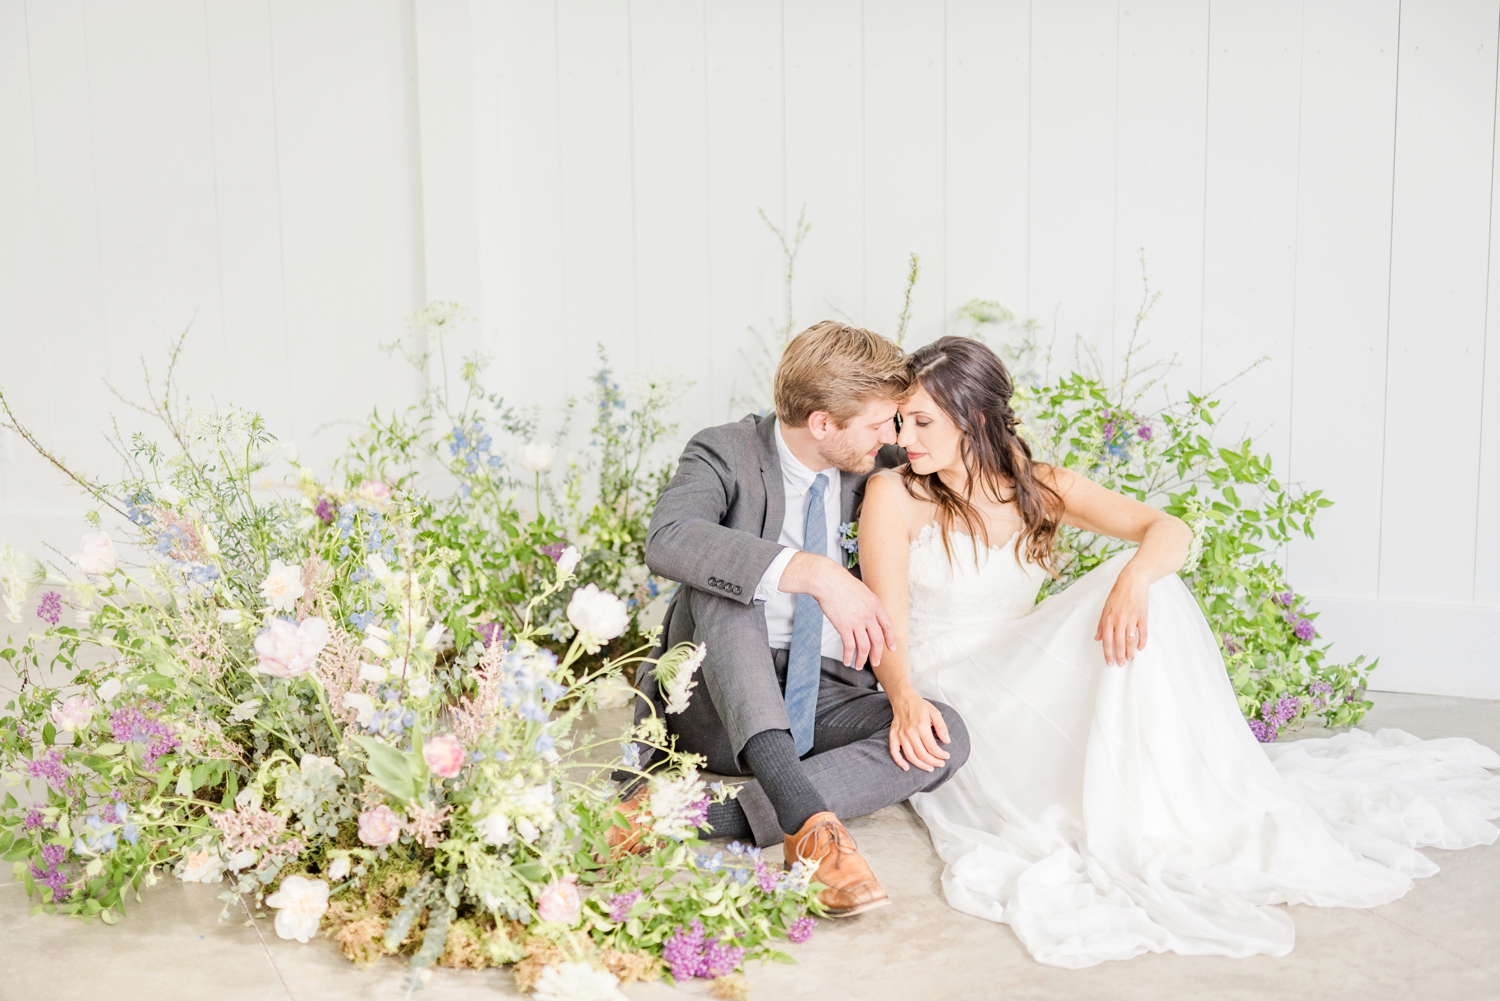 wedding-photos-surrounded-by-unique-florals-on-the-ground